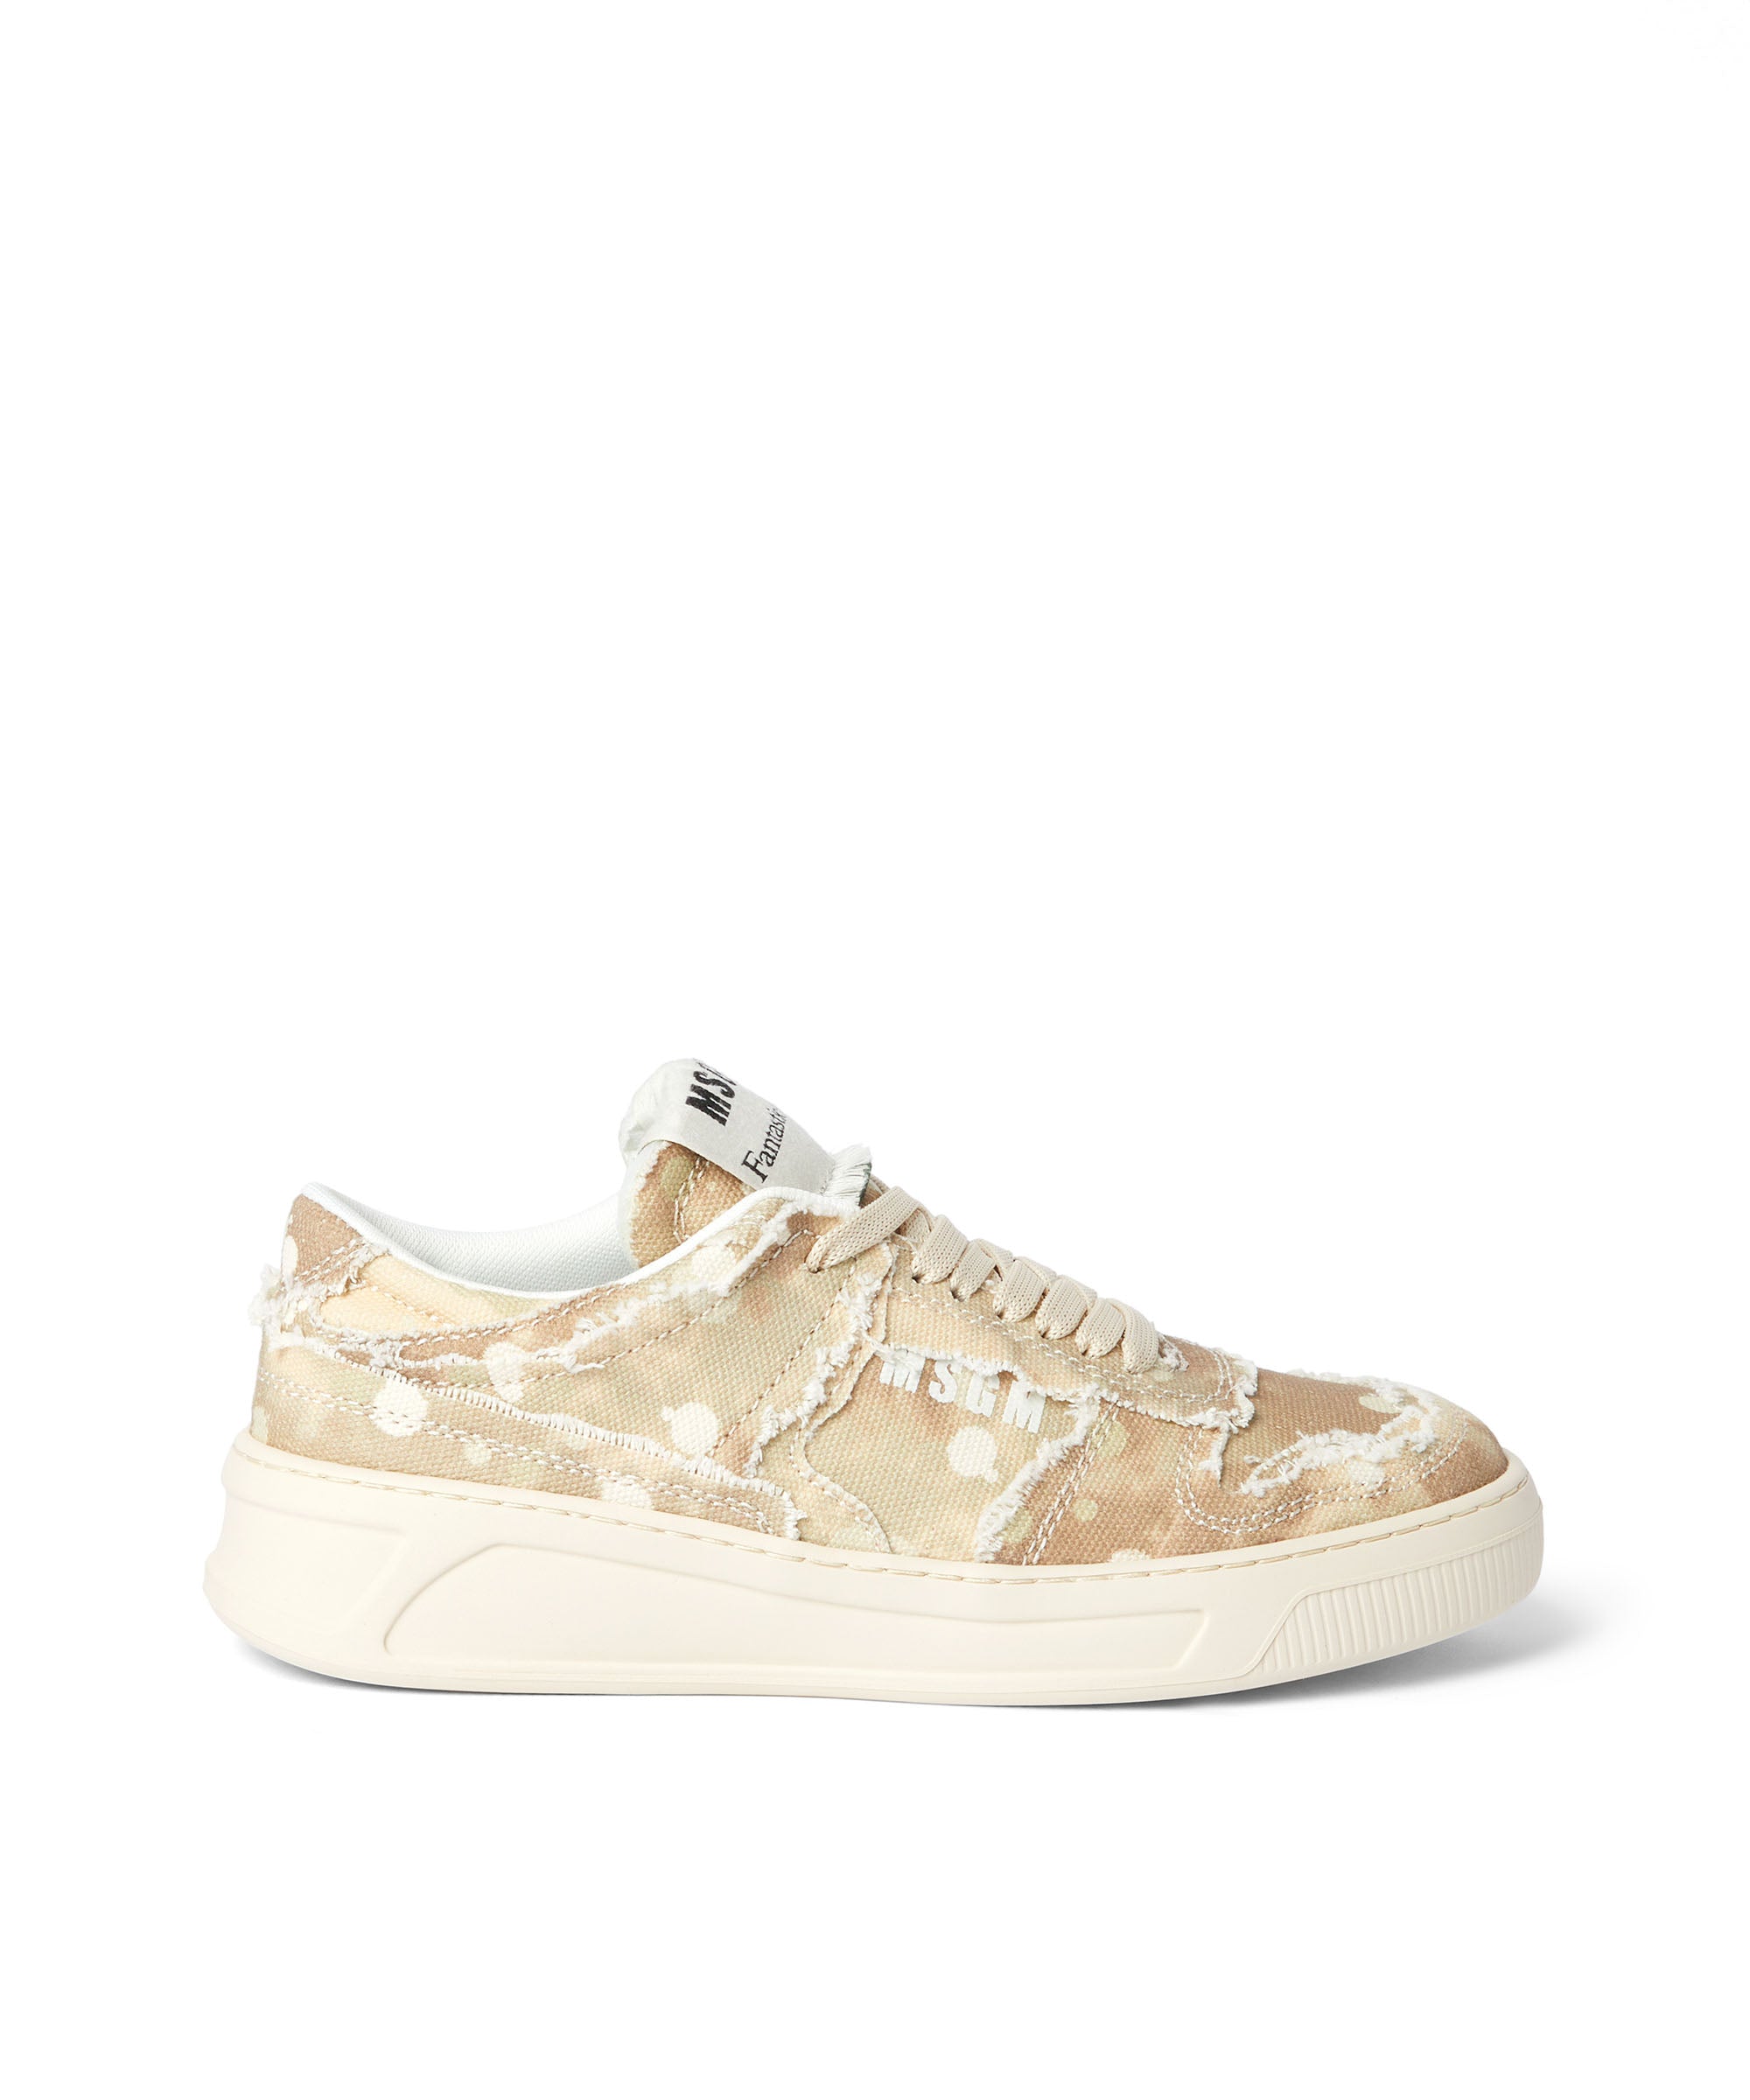 Sneakers for women: designer, fashion, casual - MSGM Official